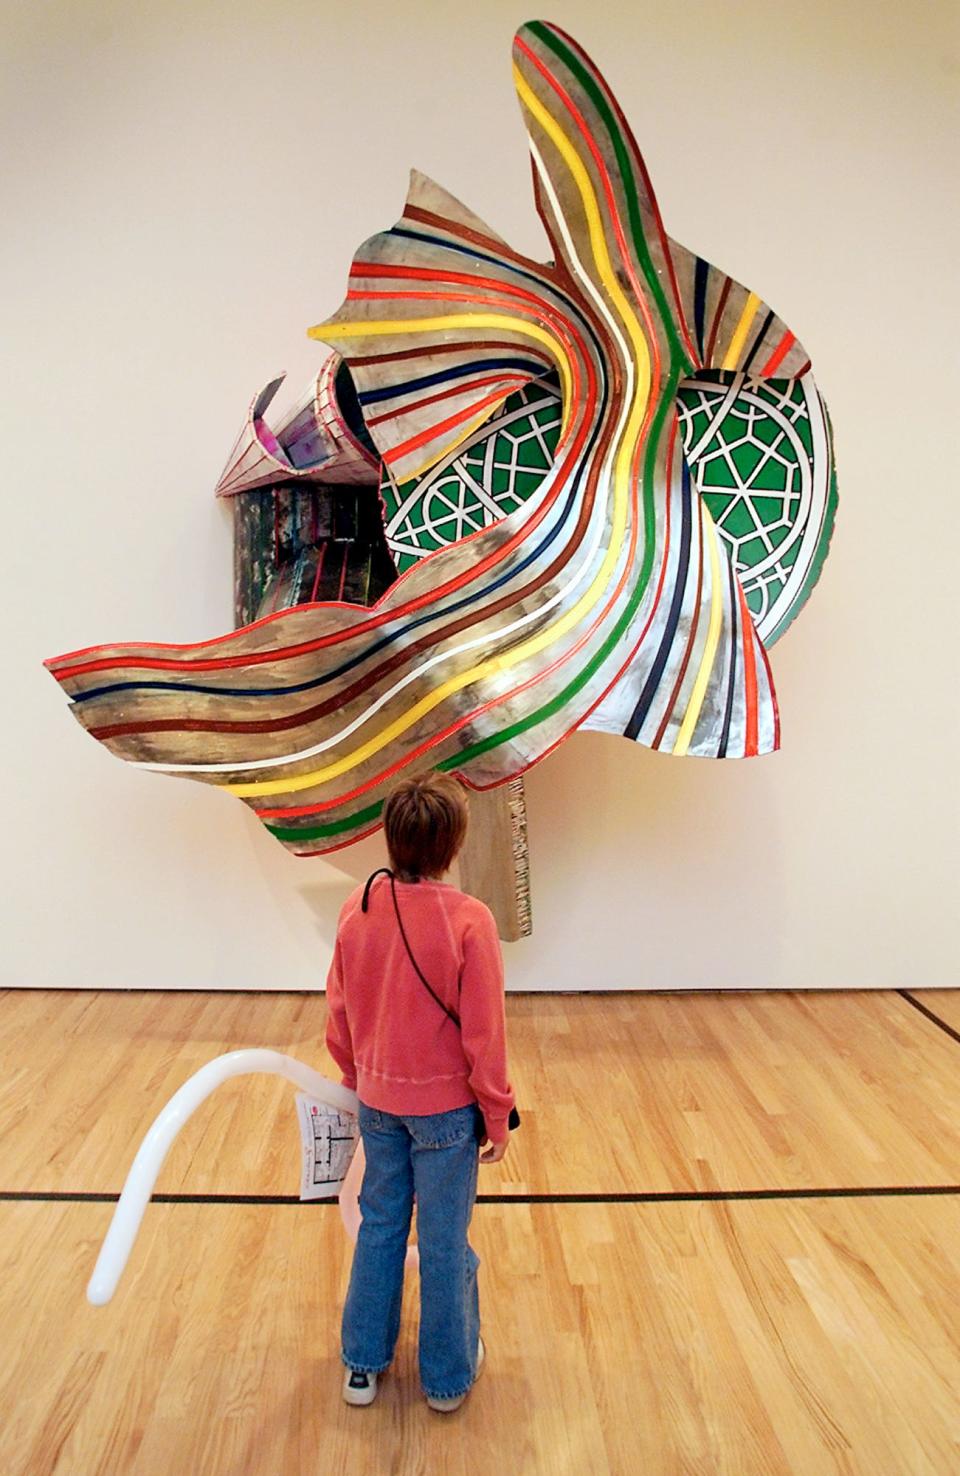 Jessica Noe, 11, looks at "The Spirit-Spout" by Frank Stella during the opening day of the new Oklahoma City Museum of Art Saturday, March 16, 2002.